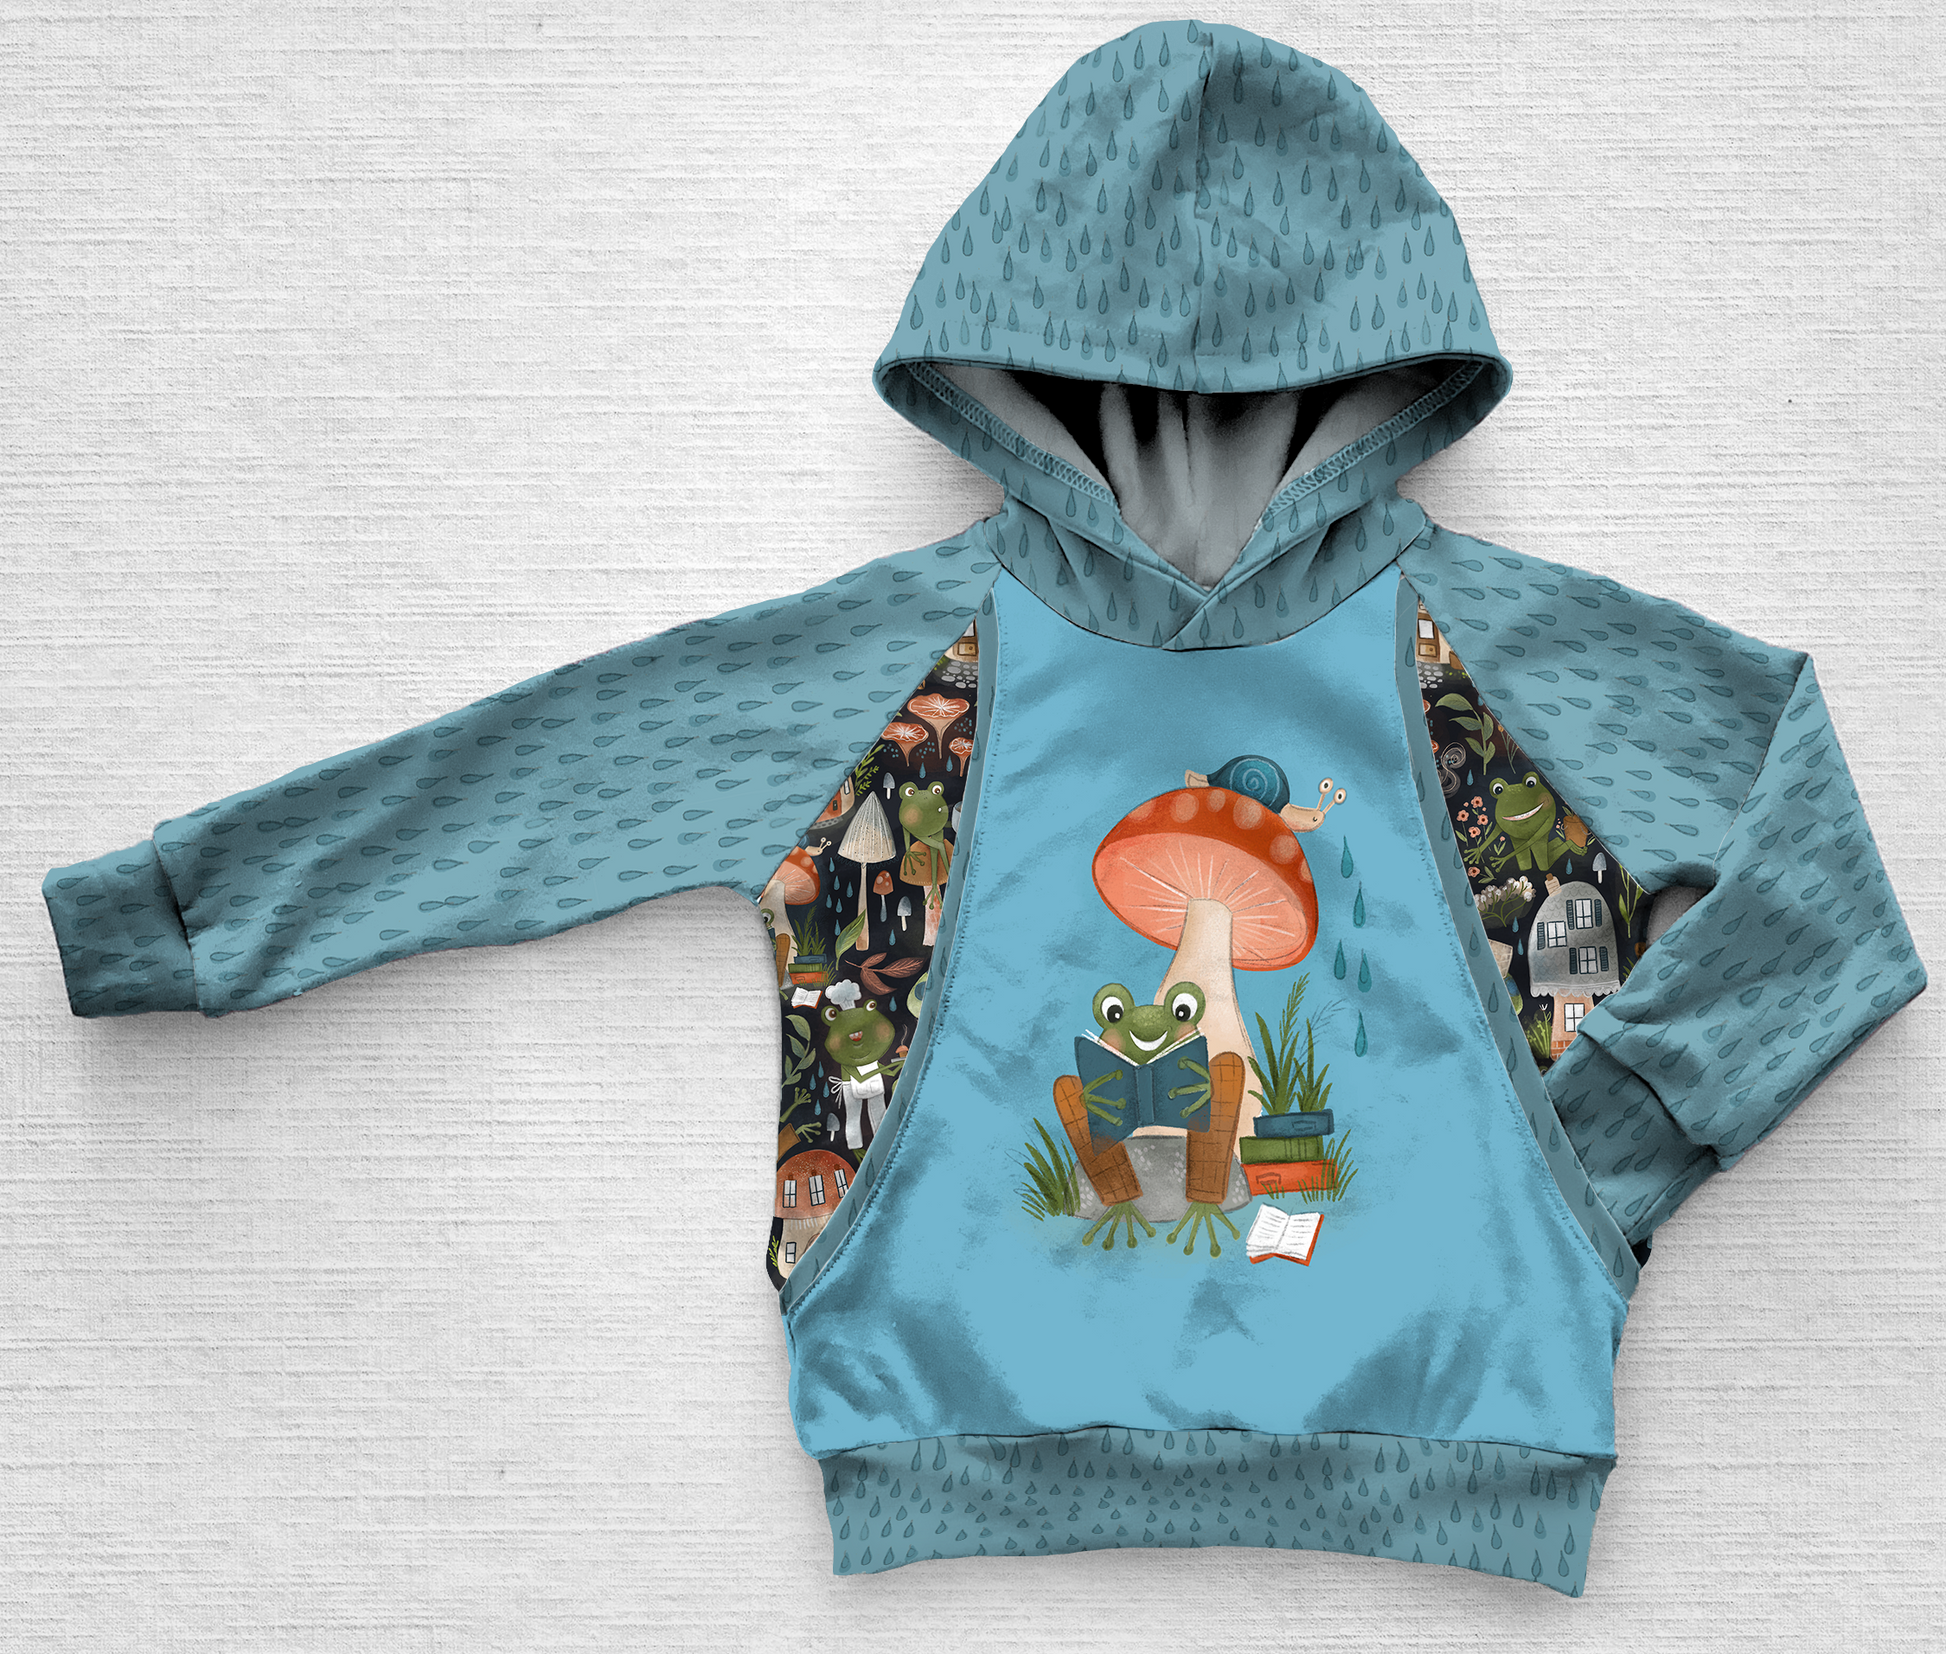 A blue panel hoodie with a frog, snail, and raindrops